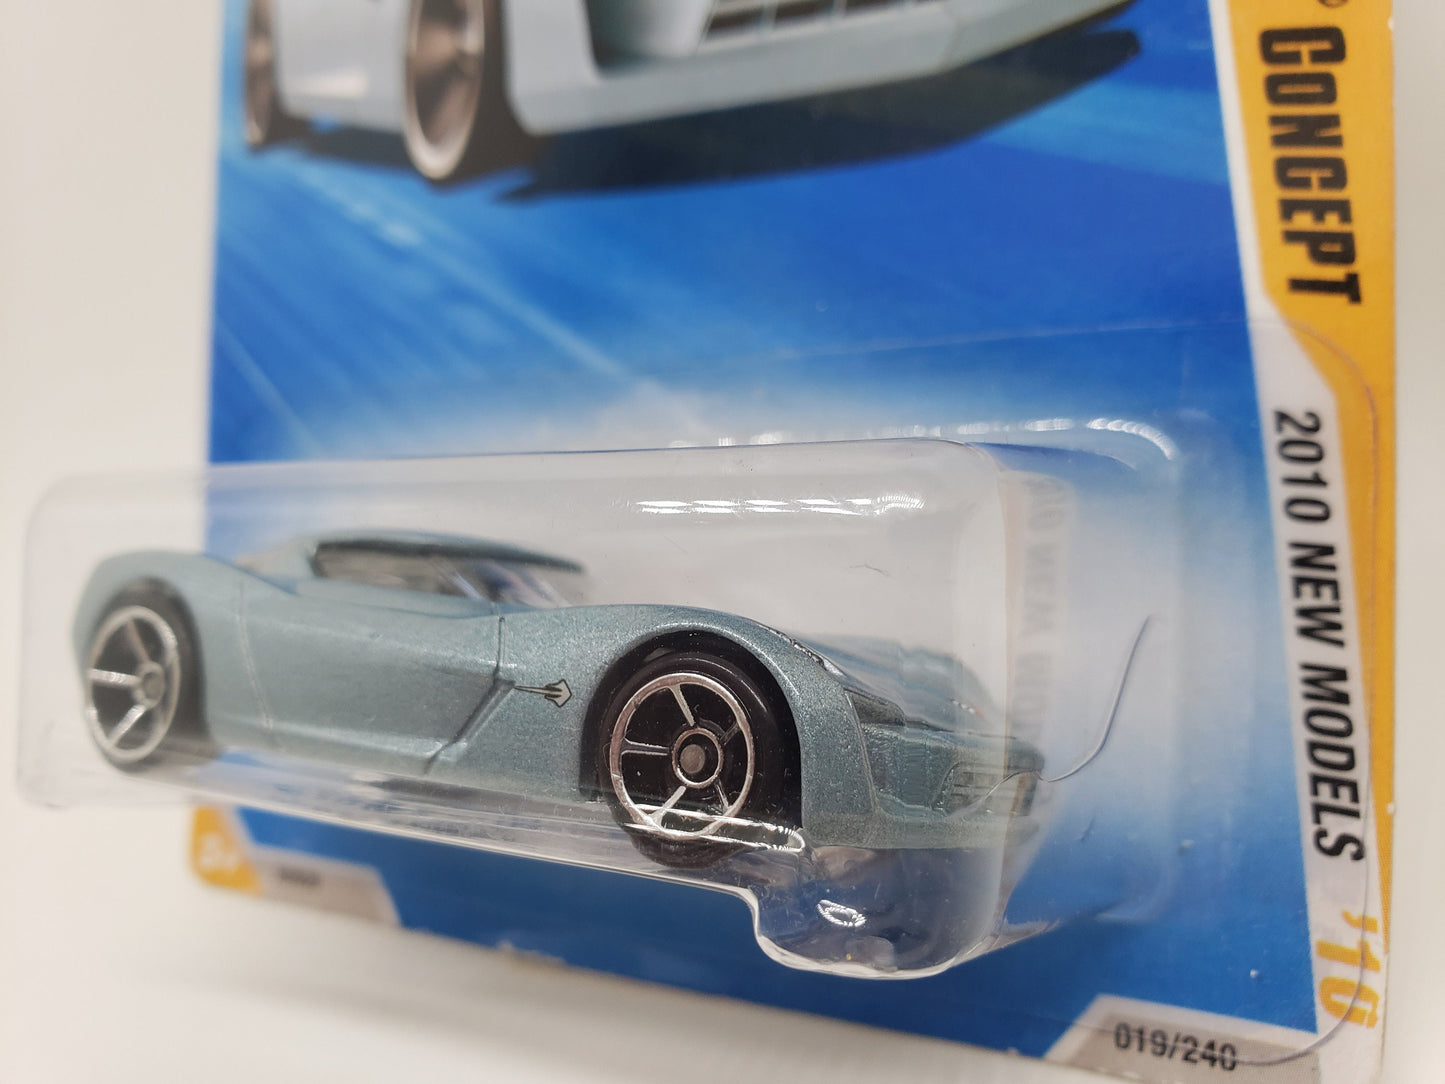 Hot Wheels Corvette Stingray Concept Metalflake Grey New Models Perfect Birthday Gift Miniature Collectable Model Toy Car